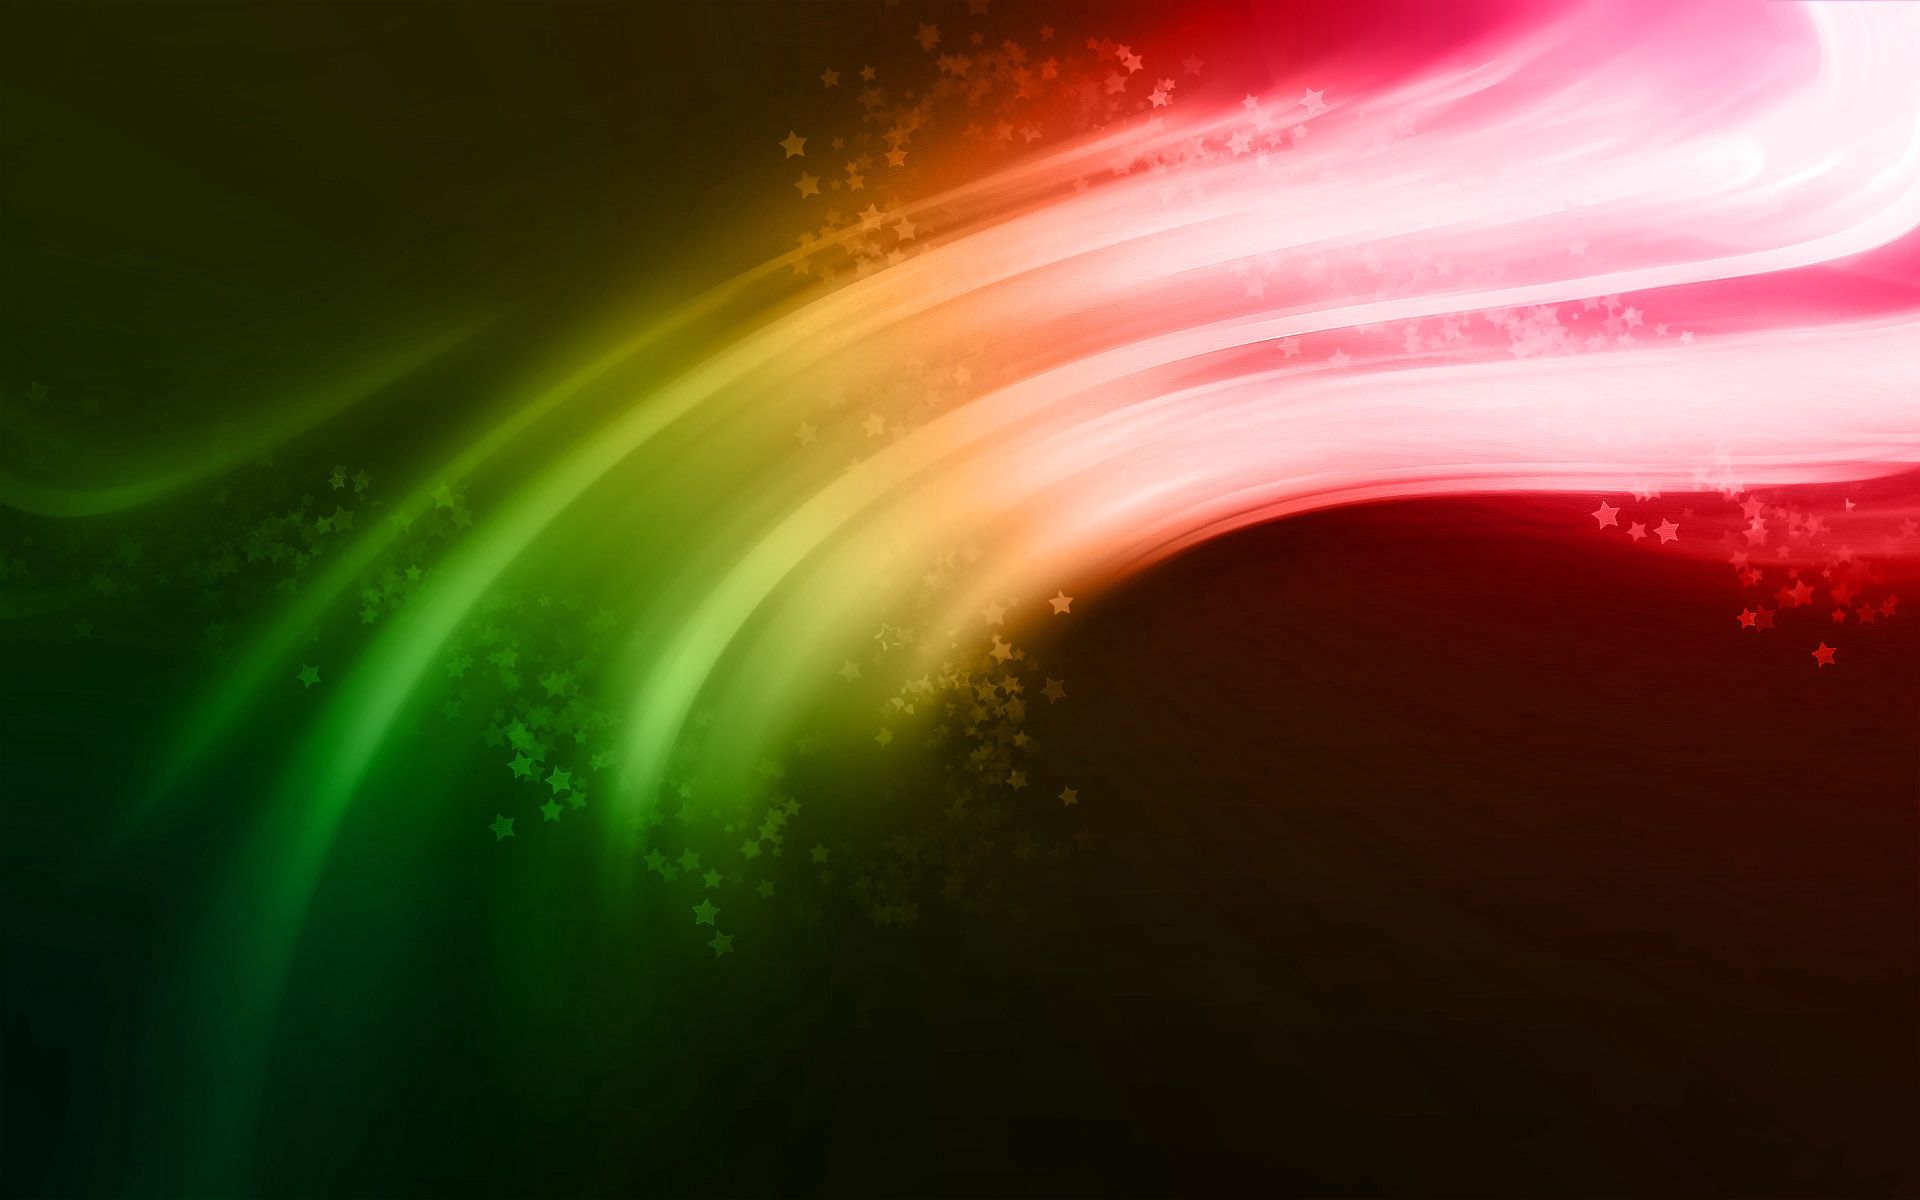 Cool HD Wallpaper motley, multicolored, rainbow, abstract